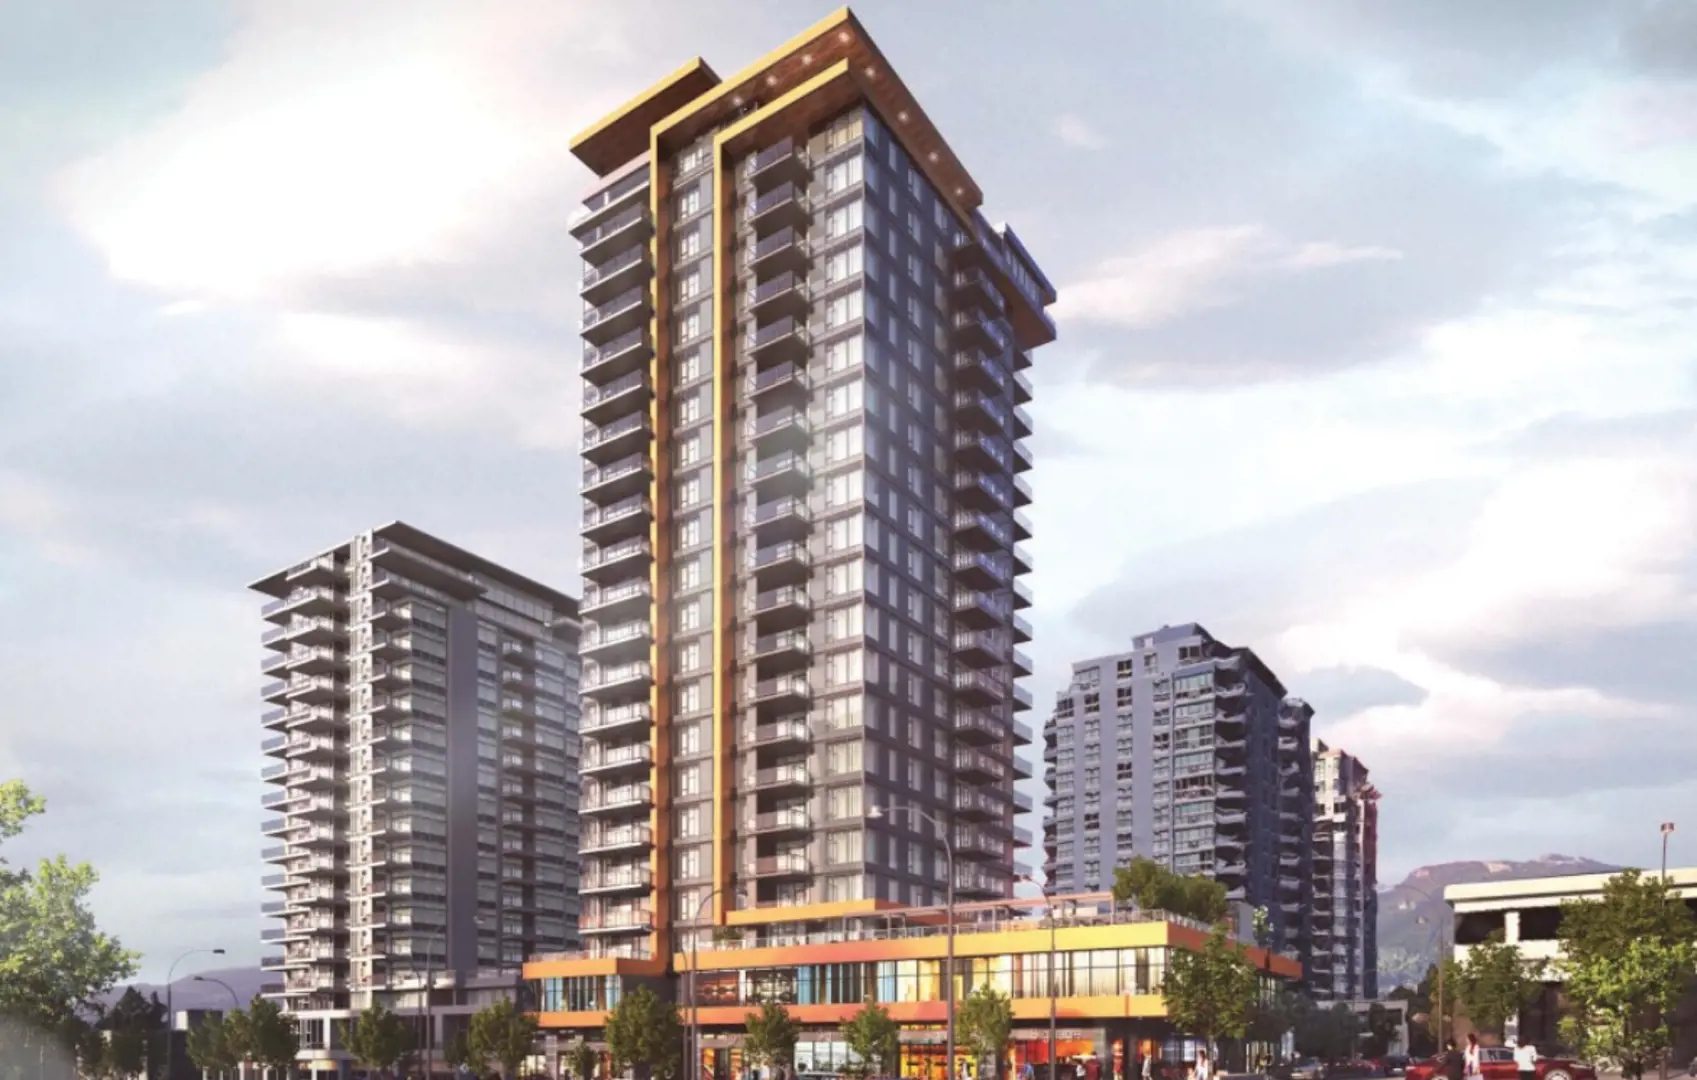 132 15th Street West Condos located at 132 15th Street West, North Vancouver, BC image